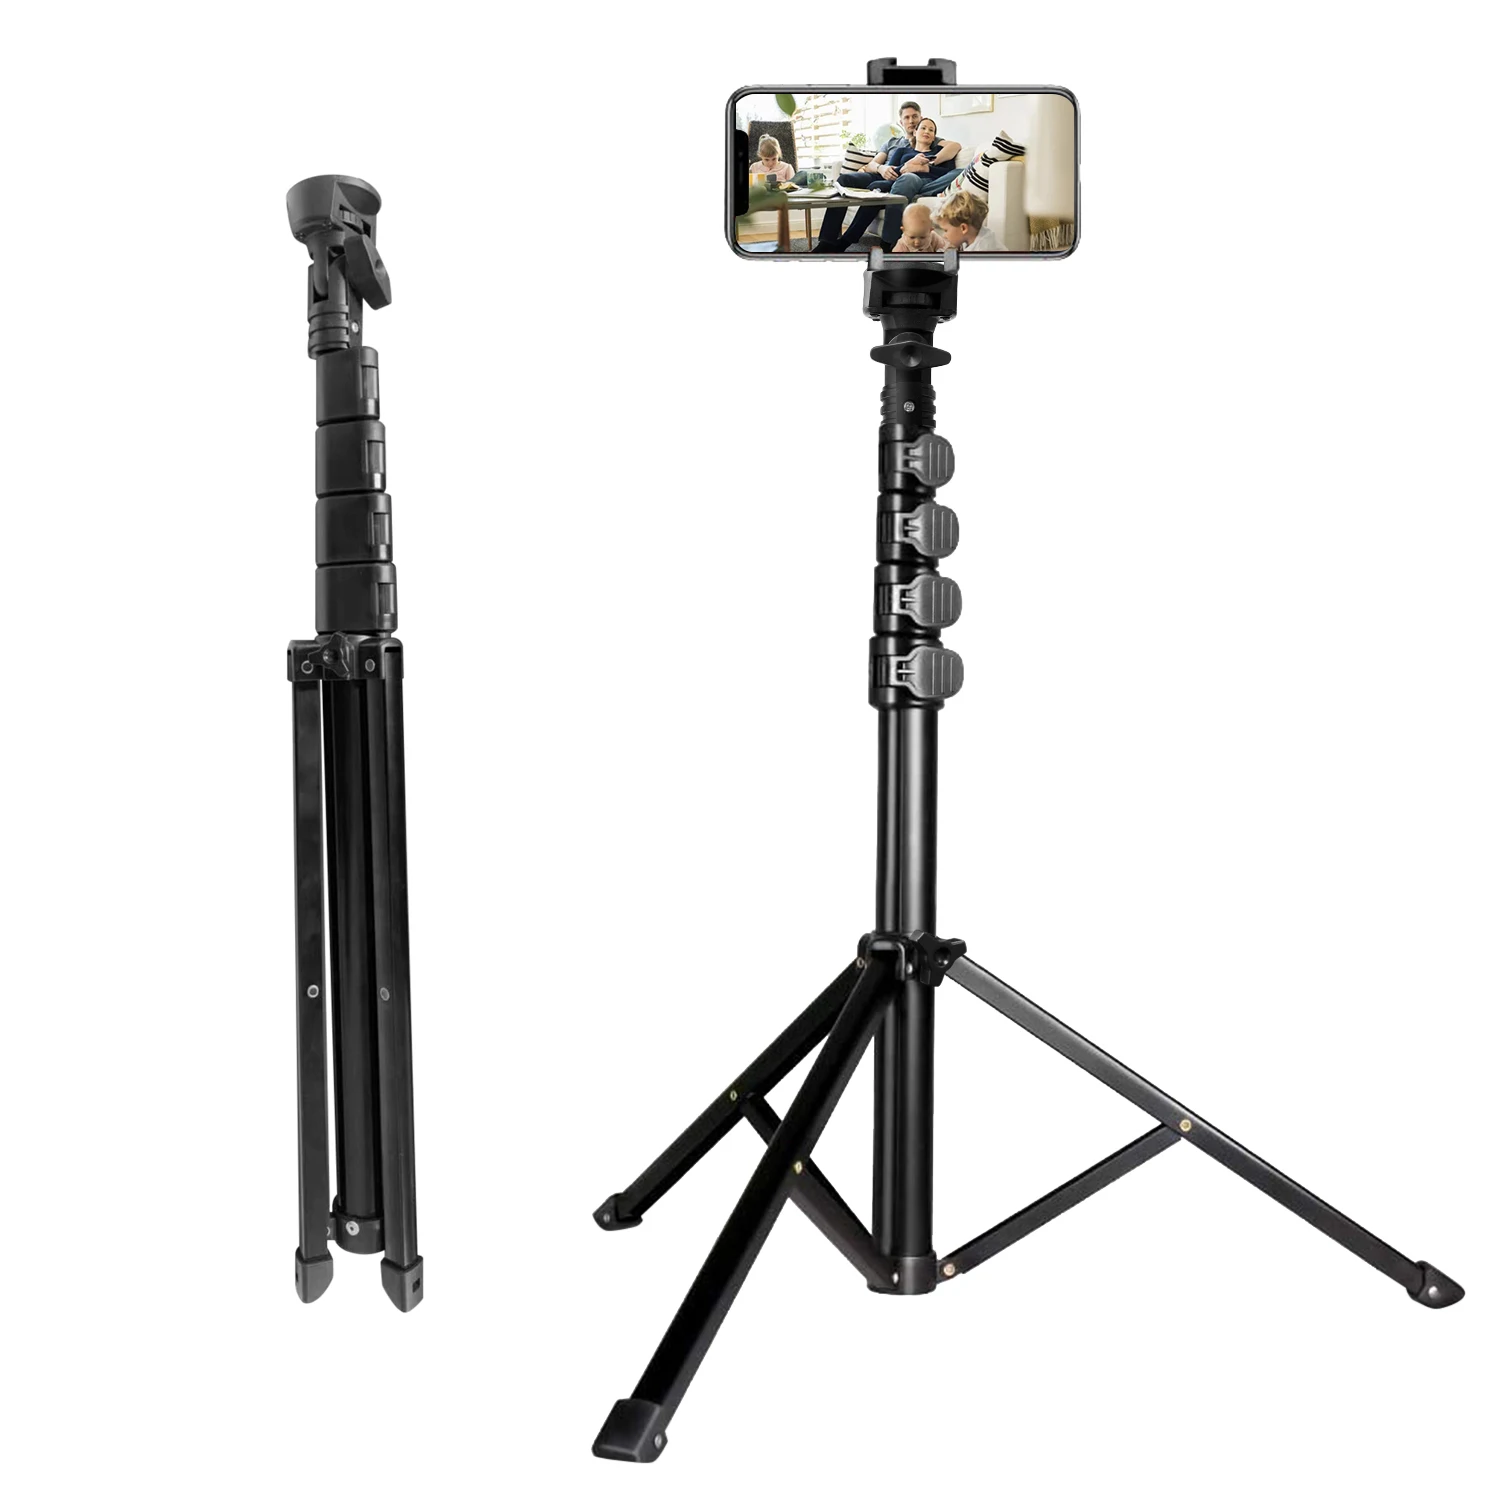 Tripod Stand & Selfie Stick Tripod,Cellphone Tripod with Bluetooth Remote and Phone Holder, Compatible with All Phones/Cameras